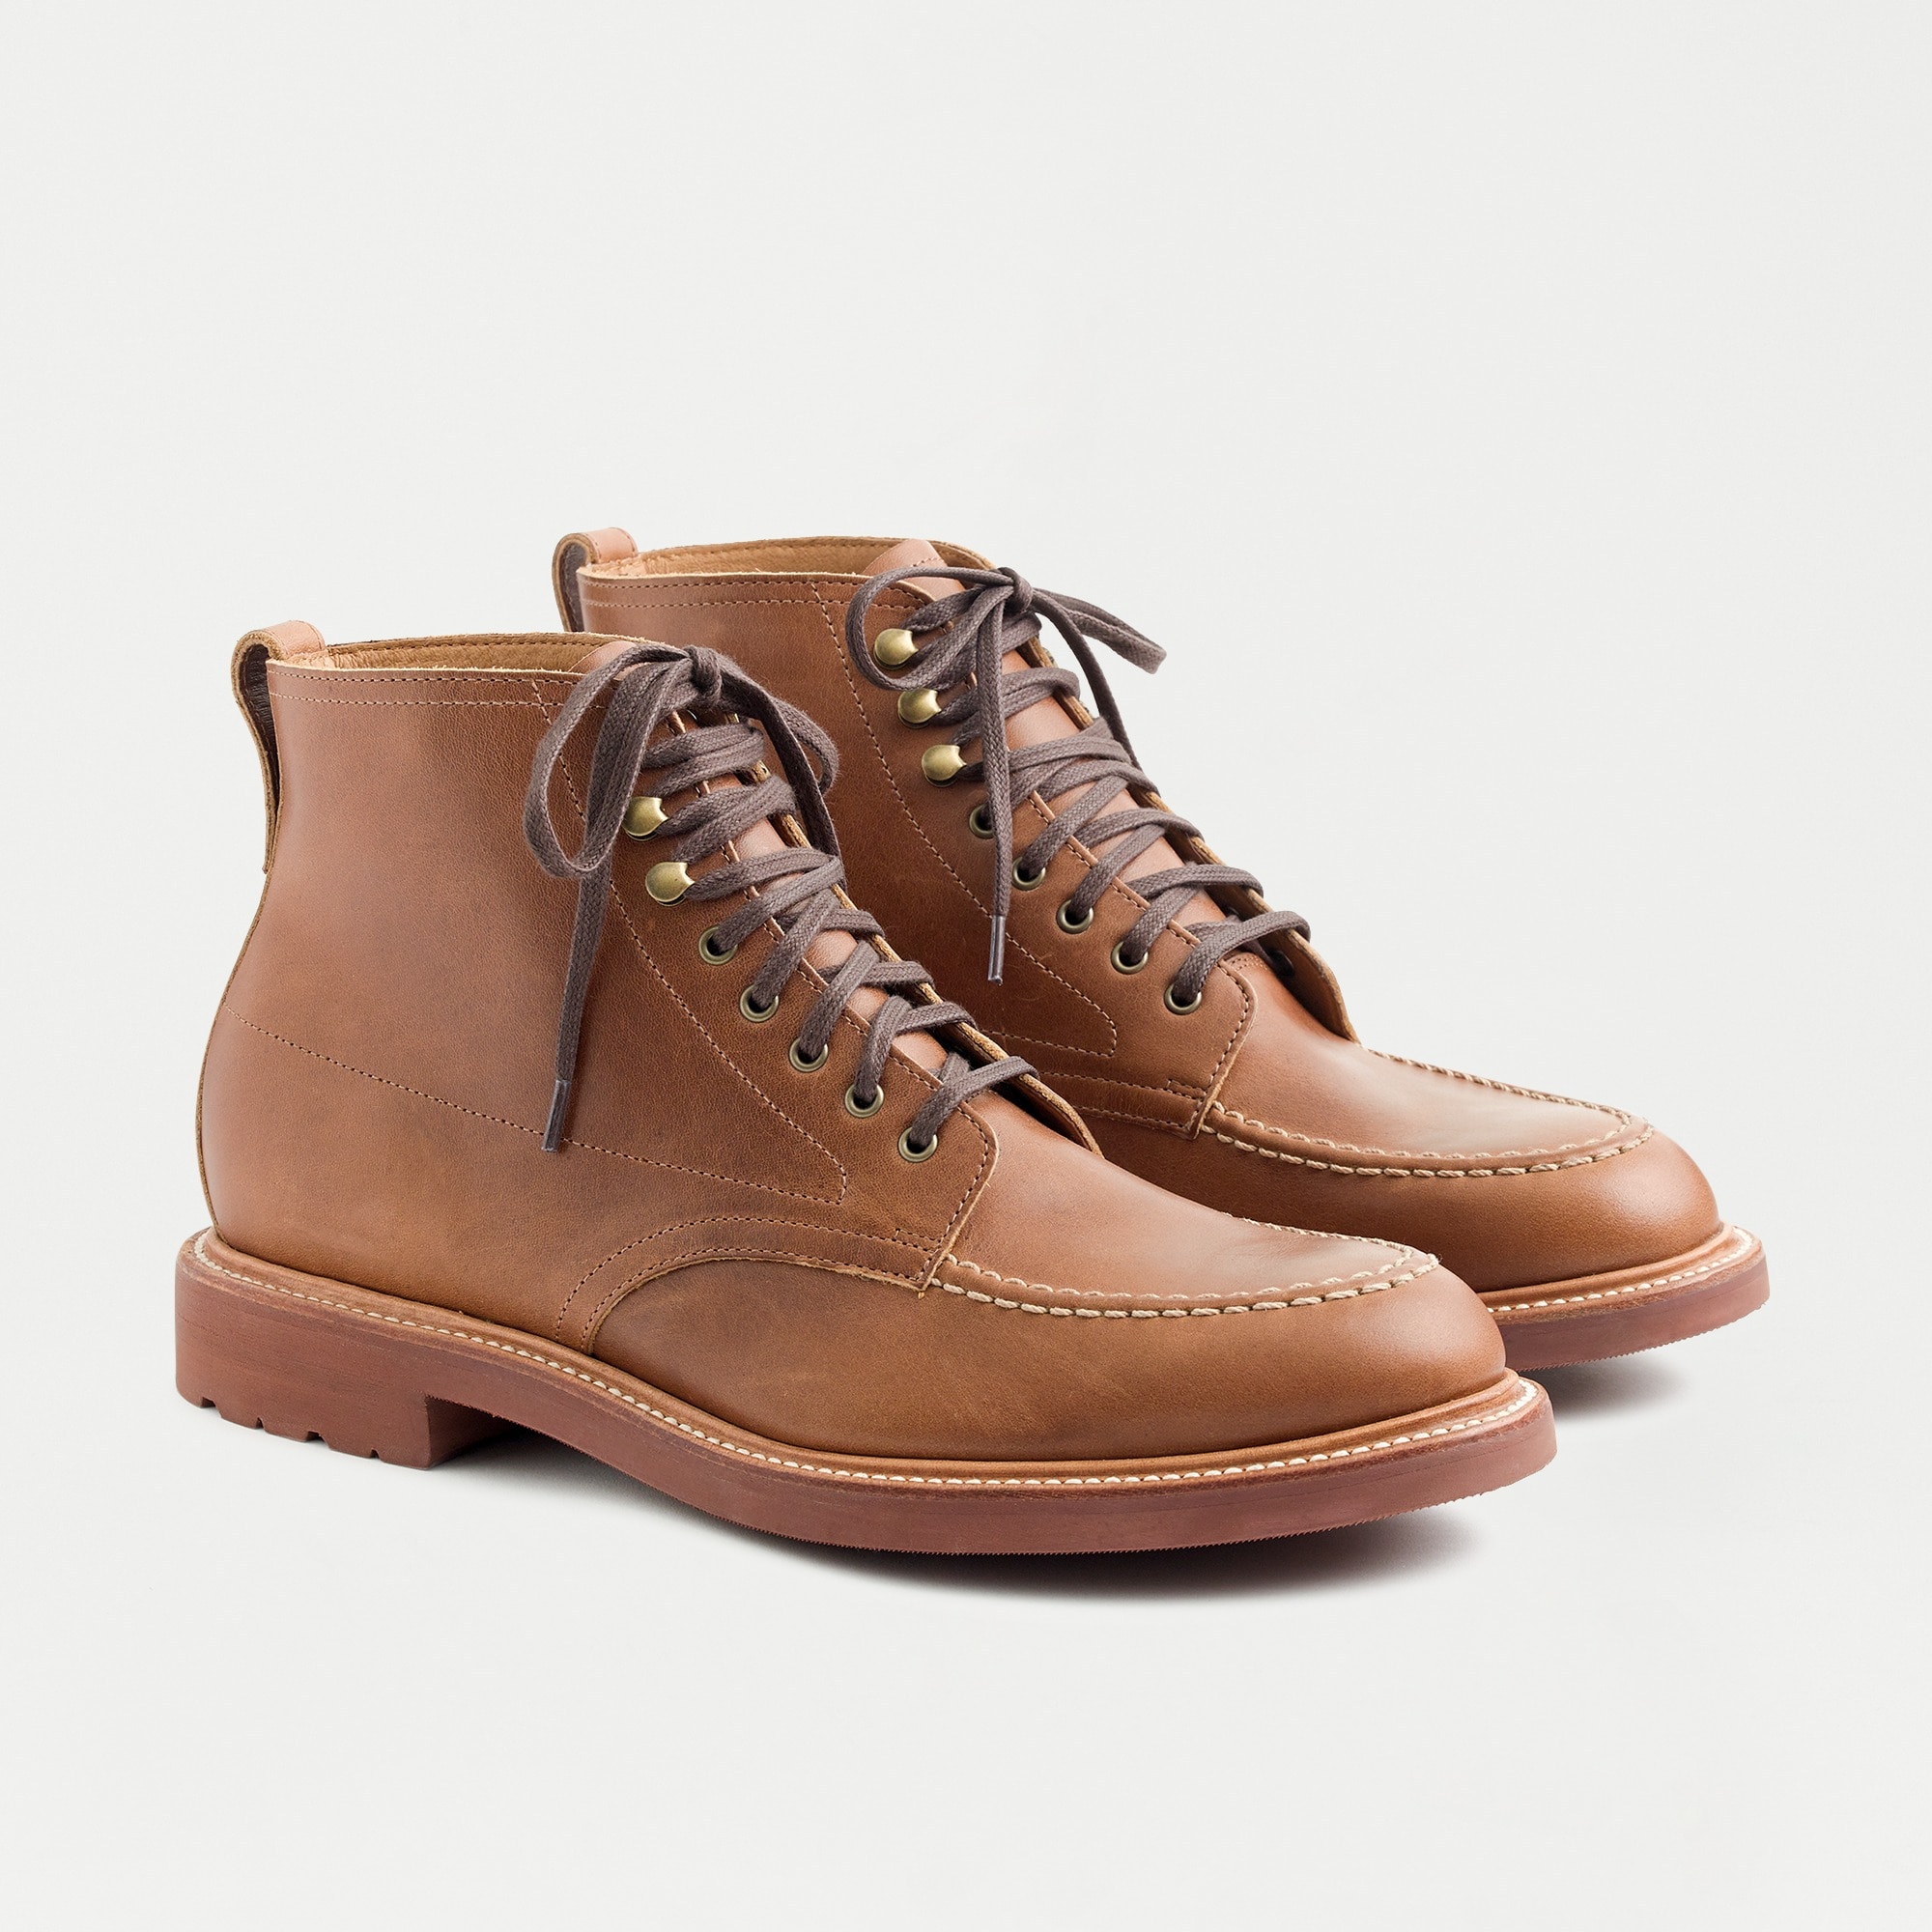 J.Crew: Kenton Leather Pacer Boots For Men